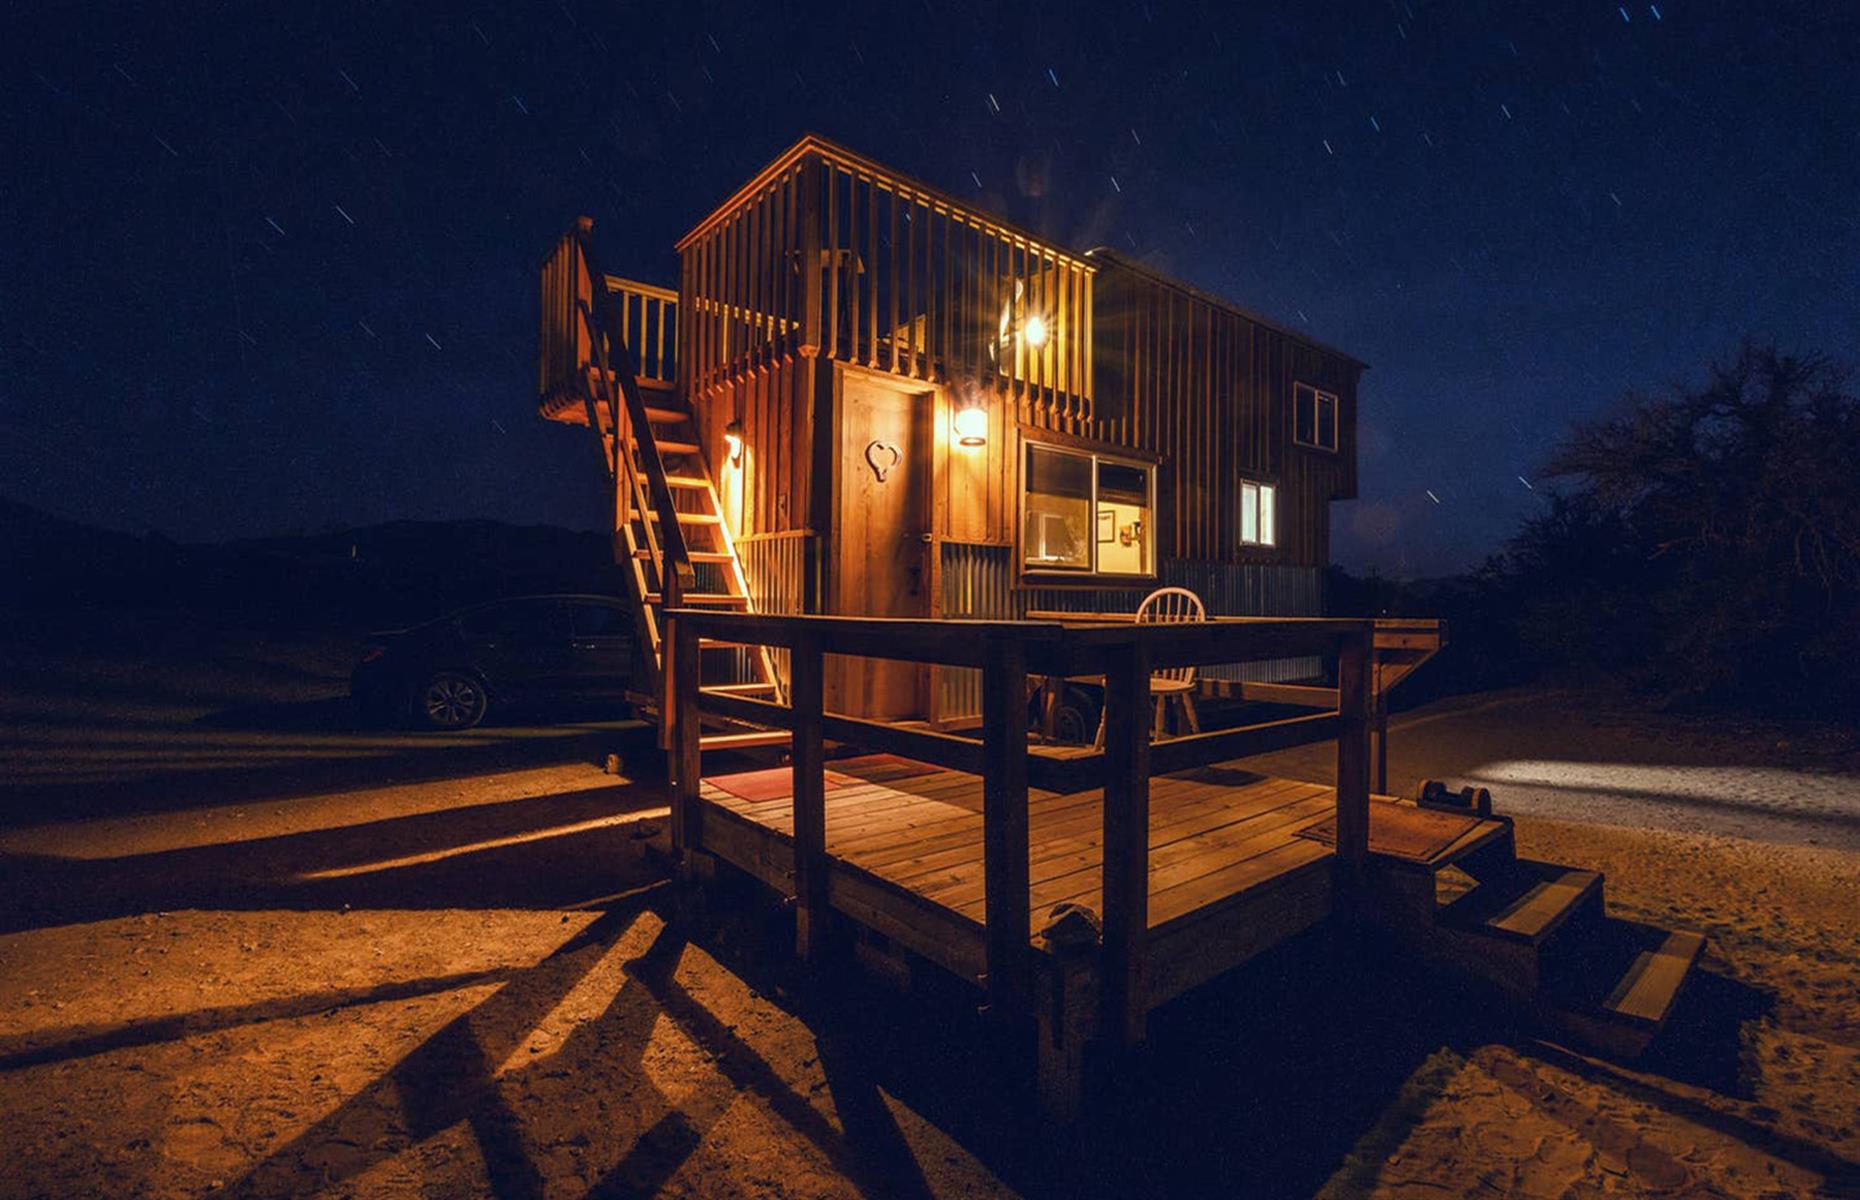 <p>Visitors can leave the shiny city lights behind and enjoy the tranquillity of the Mojave Desert at <a href="https://www.airbnb.co.uk/rooms/16585224">this tiny home</a> located in Sandy Valley. Available to book for $100 a night (bookings for a week or more get a 10% discount), the tiny house has a full bathroom, a comfortable queen-size bed and a stove, however, meals can typically be arranged to be served in the main house (check with the host for current availability). The house also has a rooftop patio for enjoying the colorful desert sunrises and sunsets.</p>